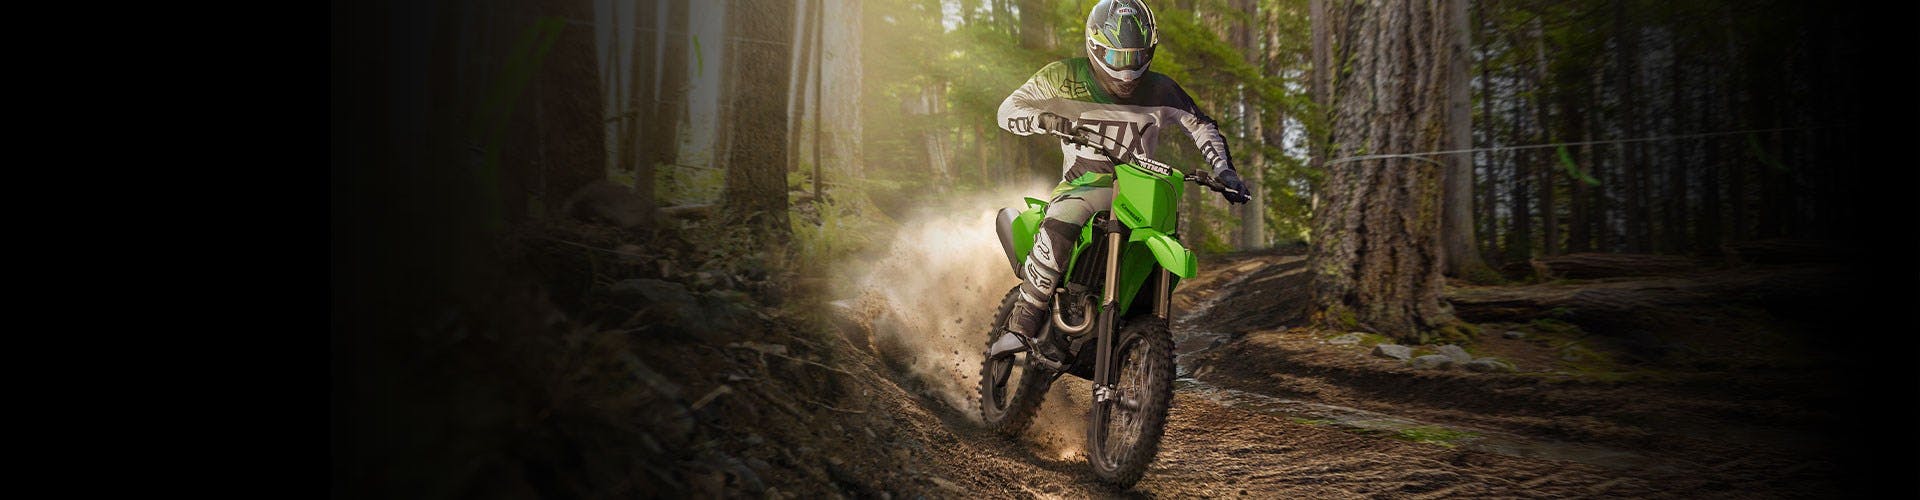 Kawasaki KX450XC in lime green colour on off road track